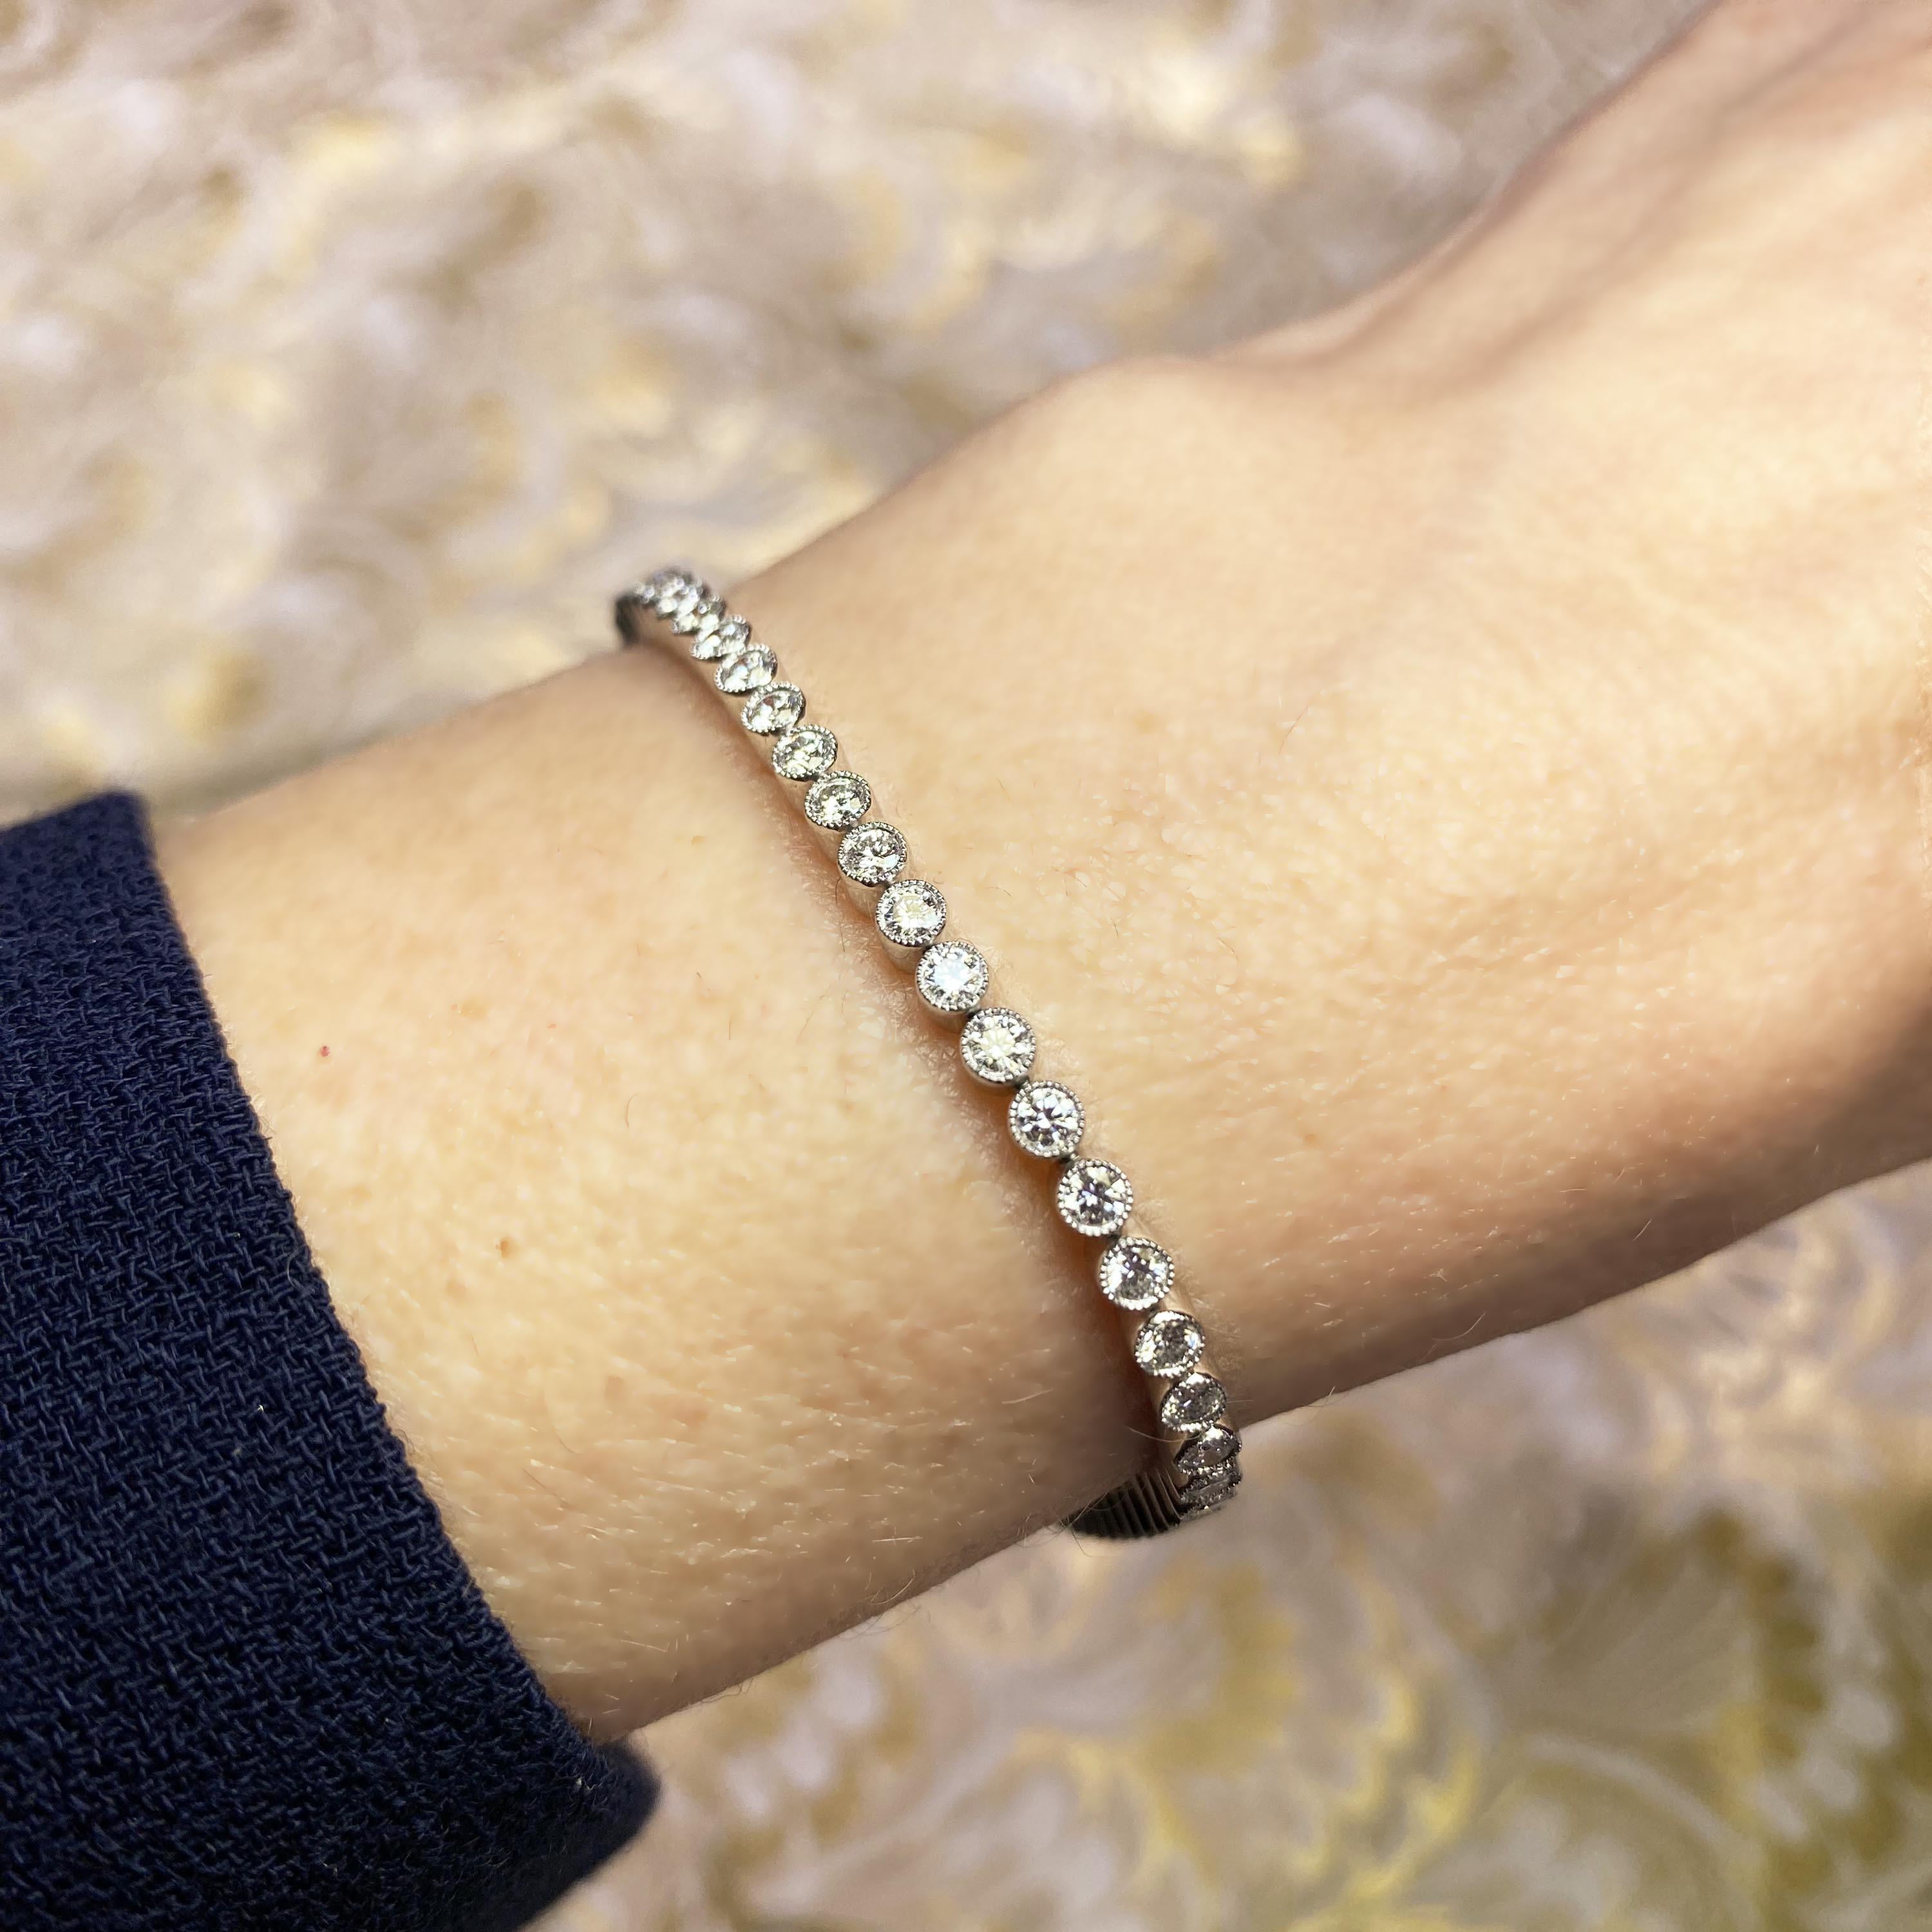 A modern diamond tennis bracelet set with round brilliant-cut diamonds, with a total weight of 2.83 carats, in millegrain edged rub over settings, individually hinged, with a box and tongue clasp, with safety catch, mounted in platinum.